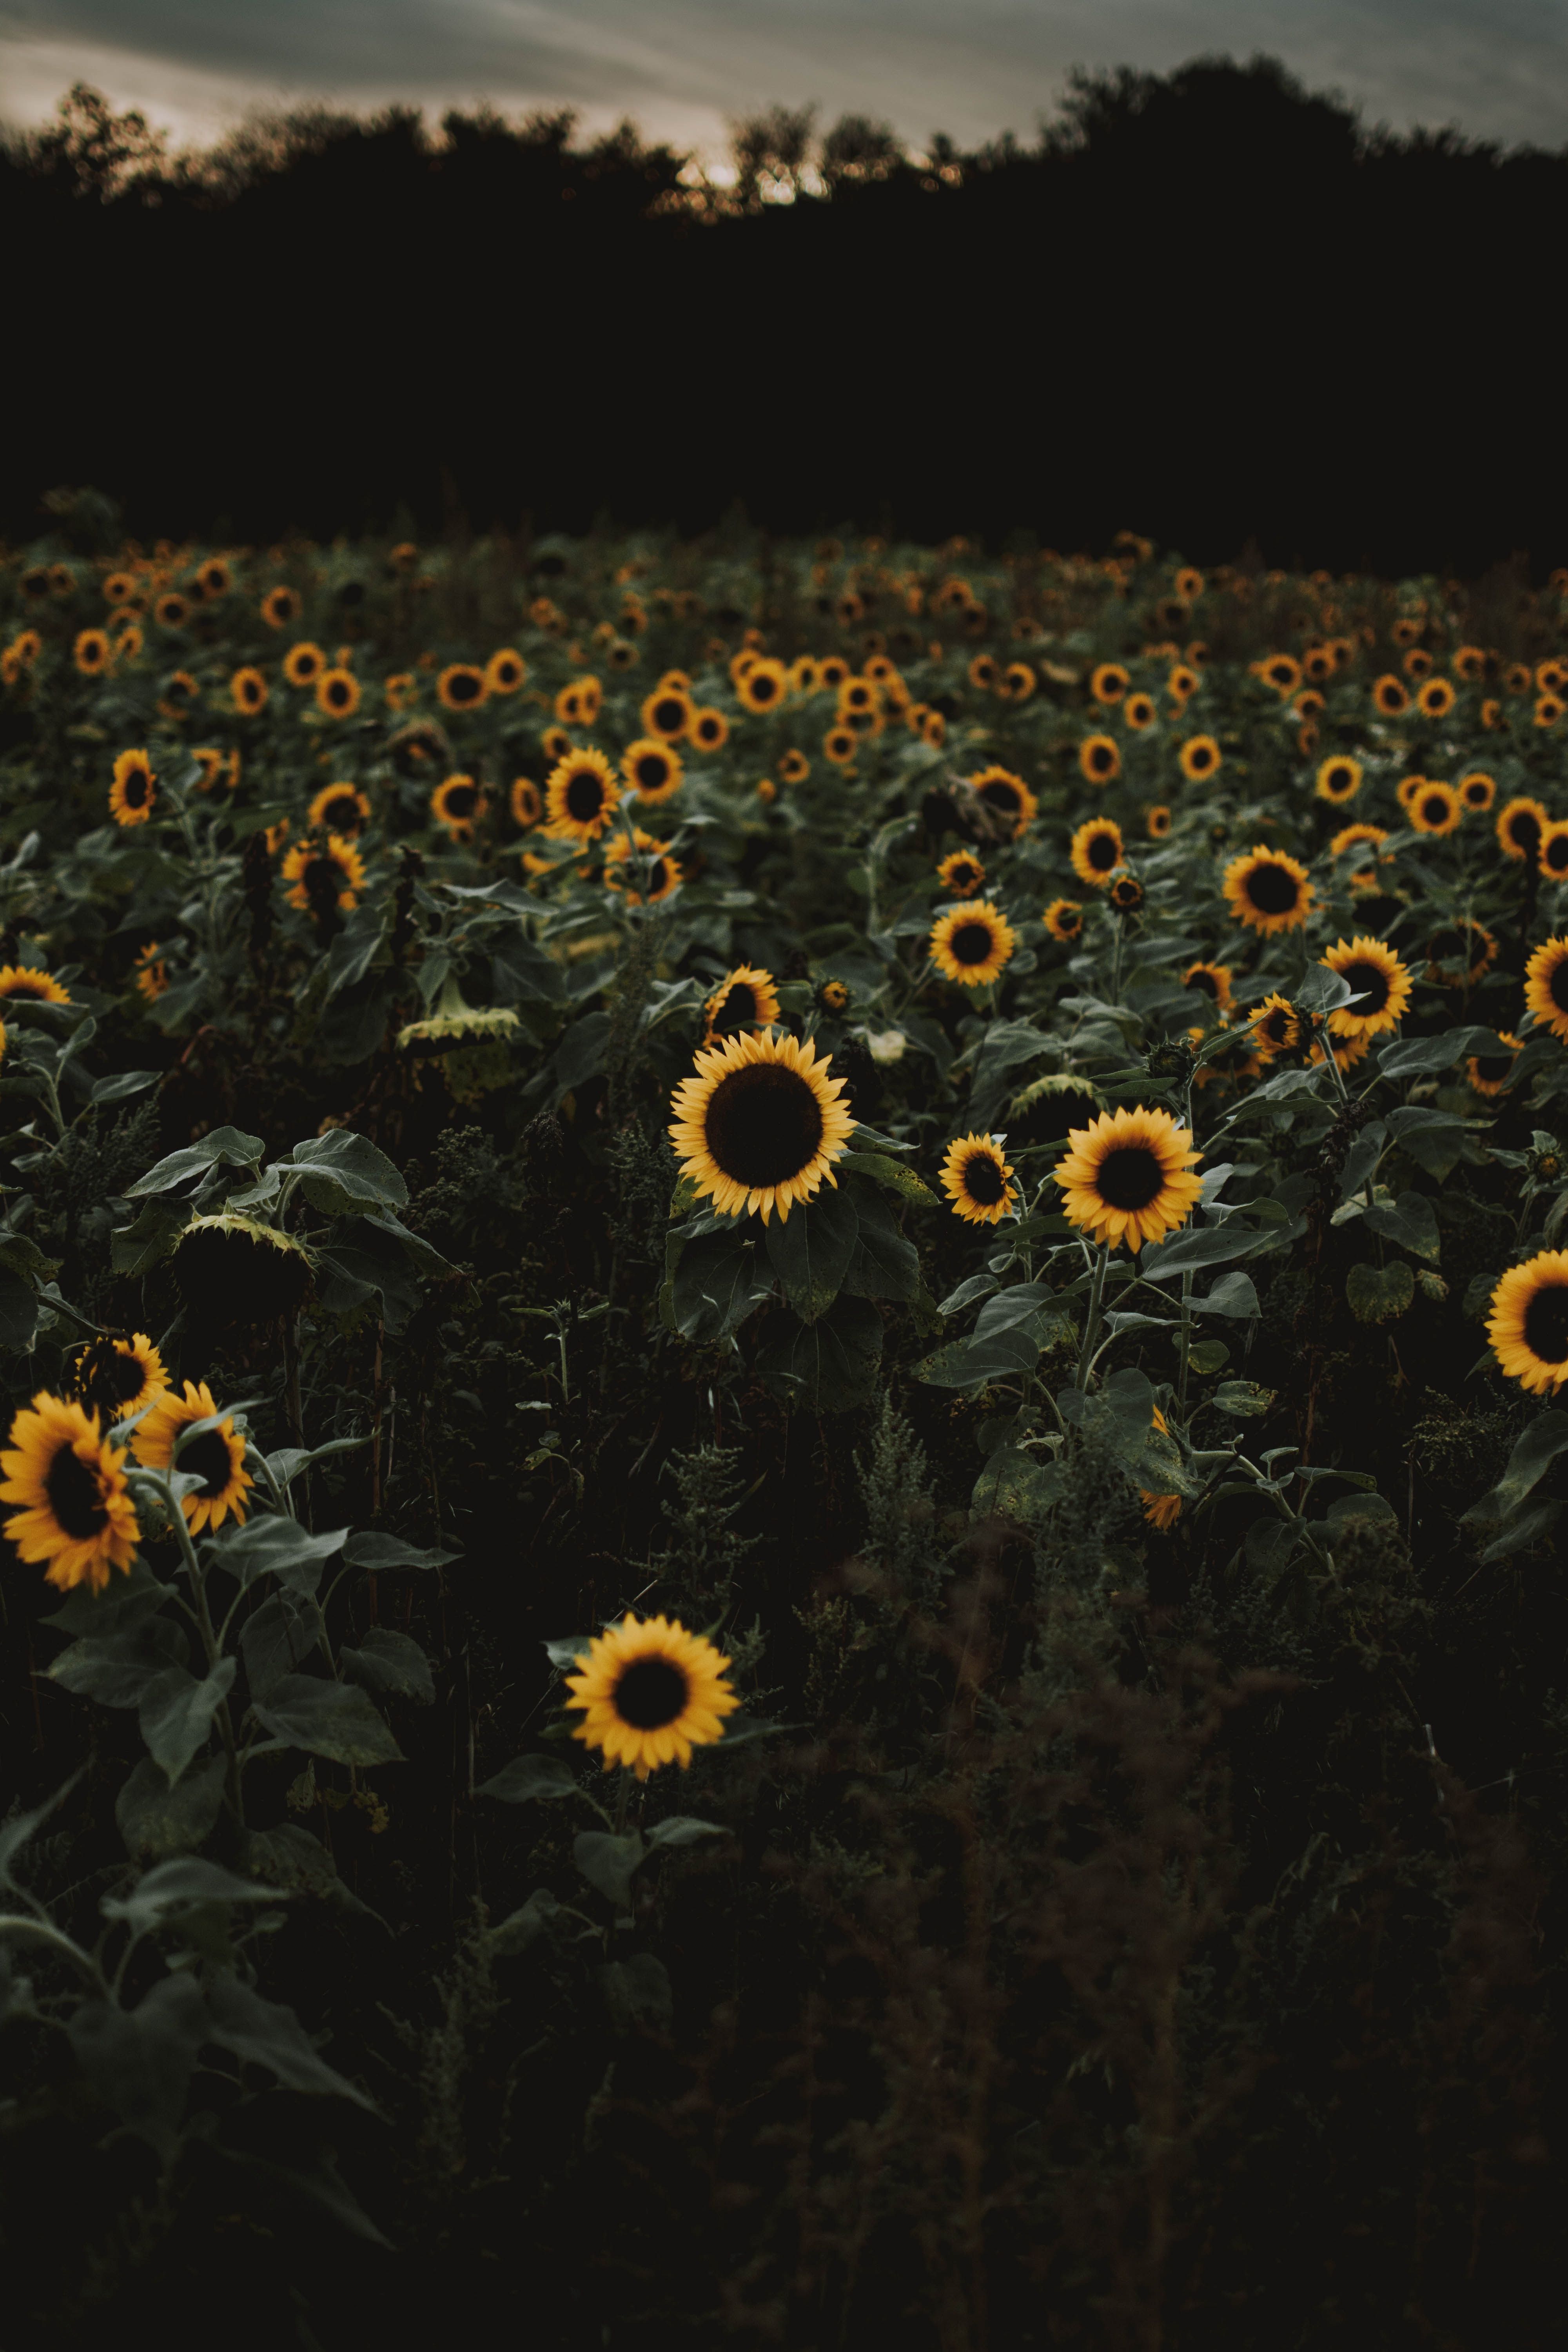 A field of sunflowers with a dark sky in the background. - Sunflower